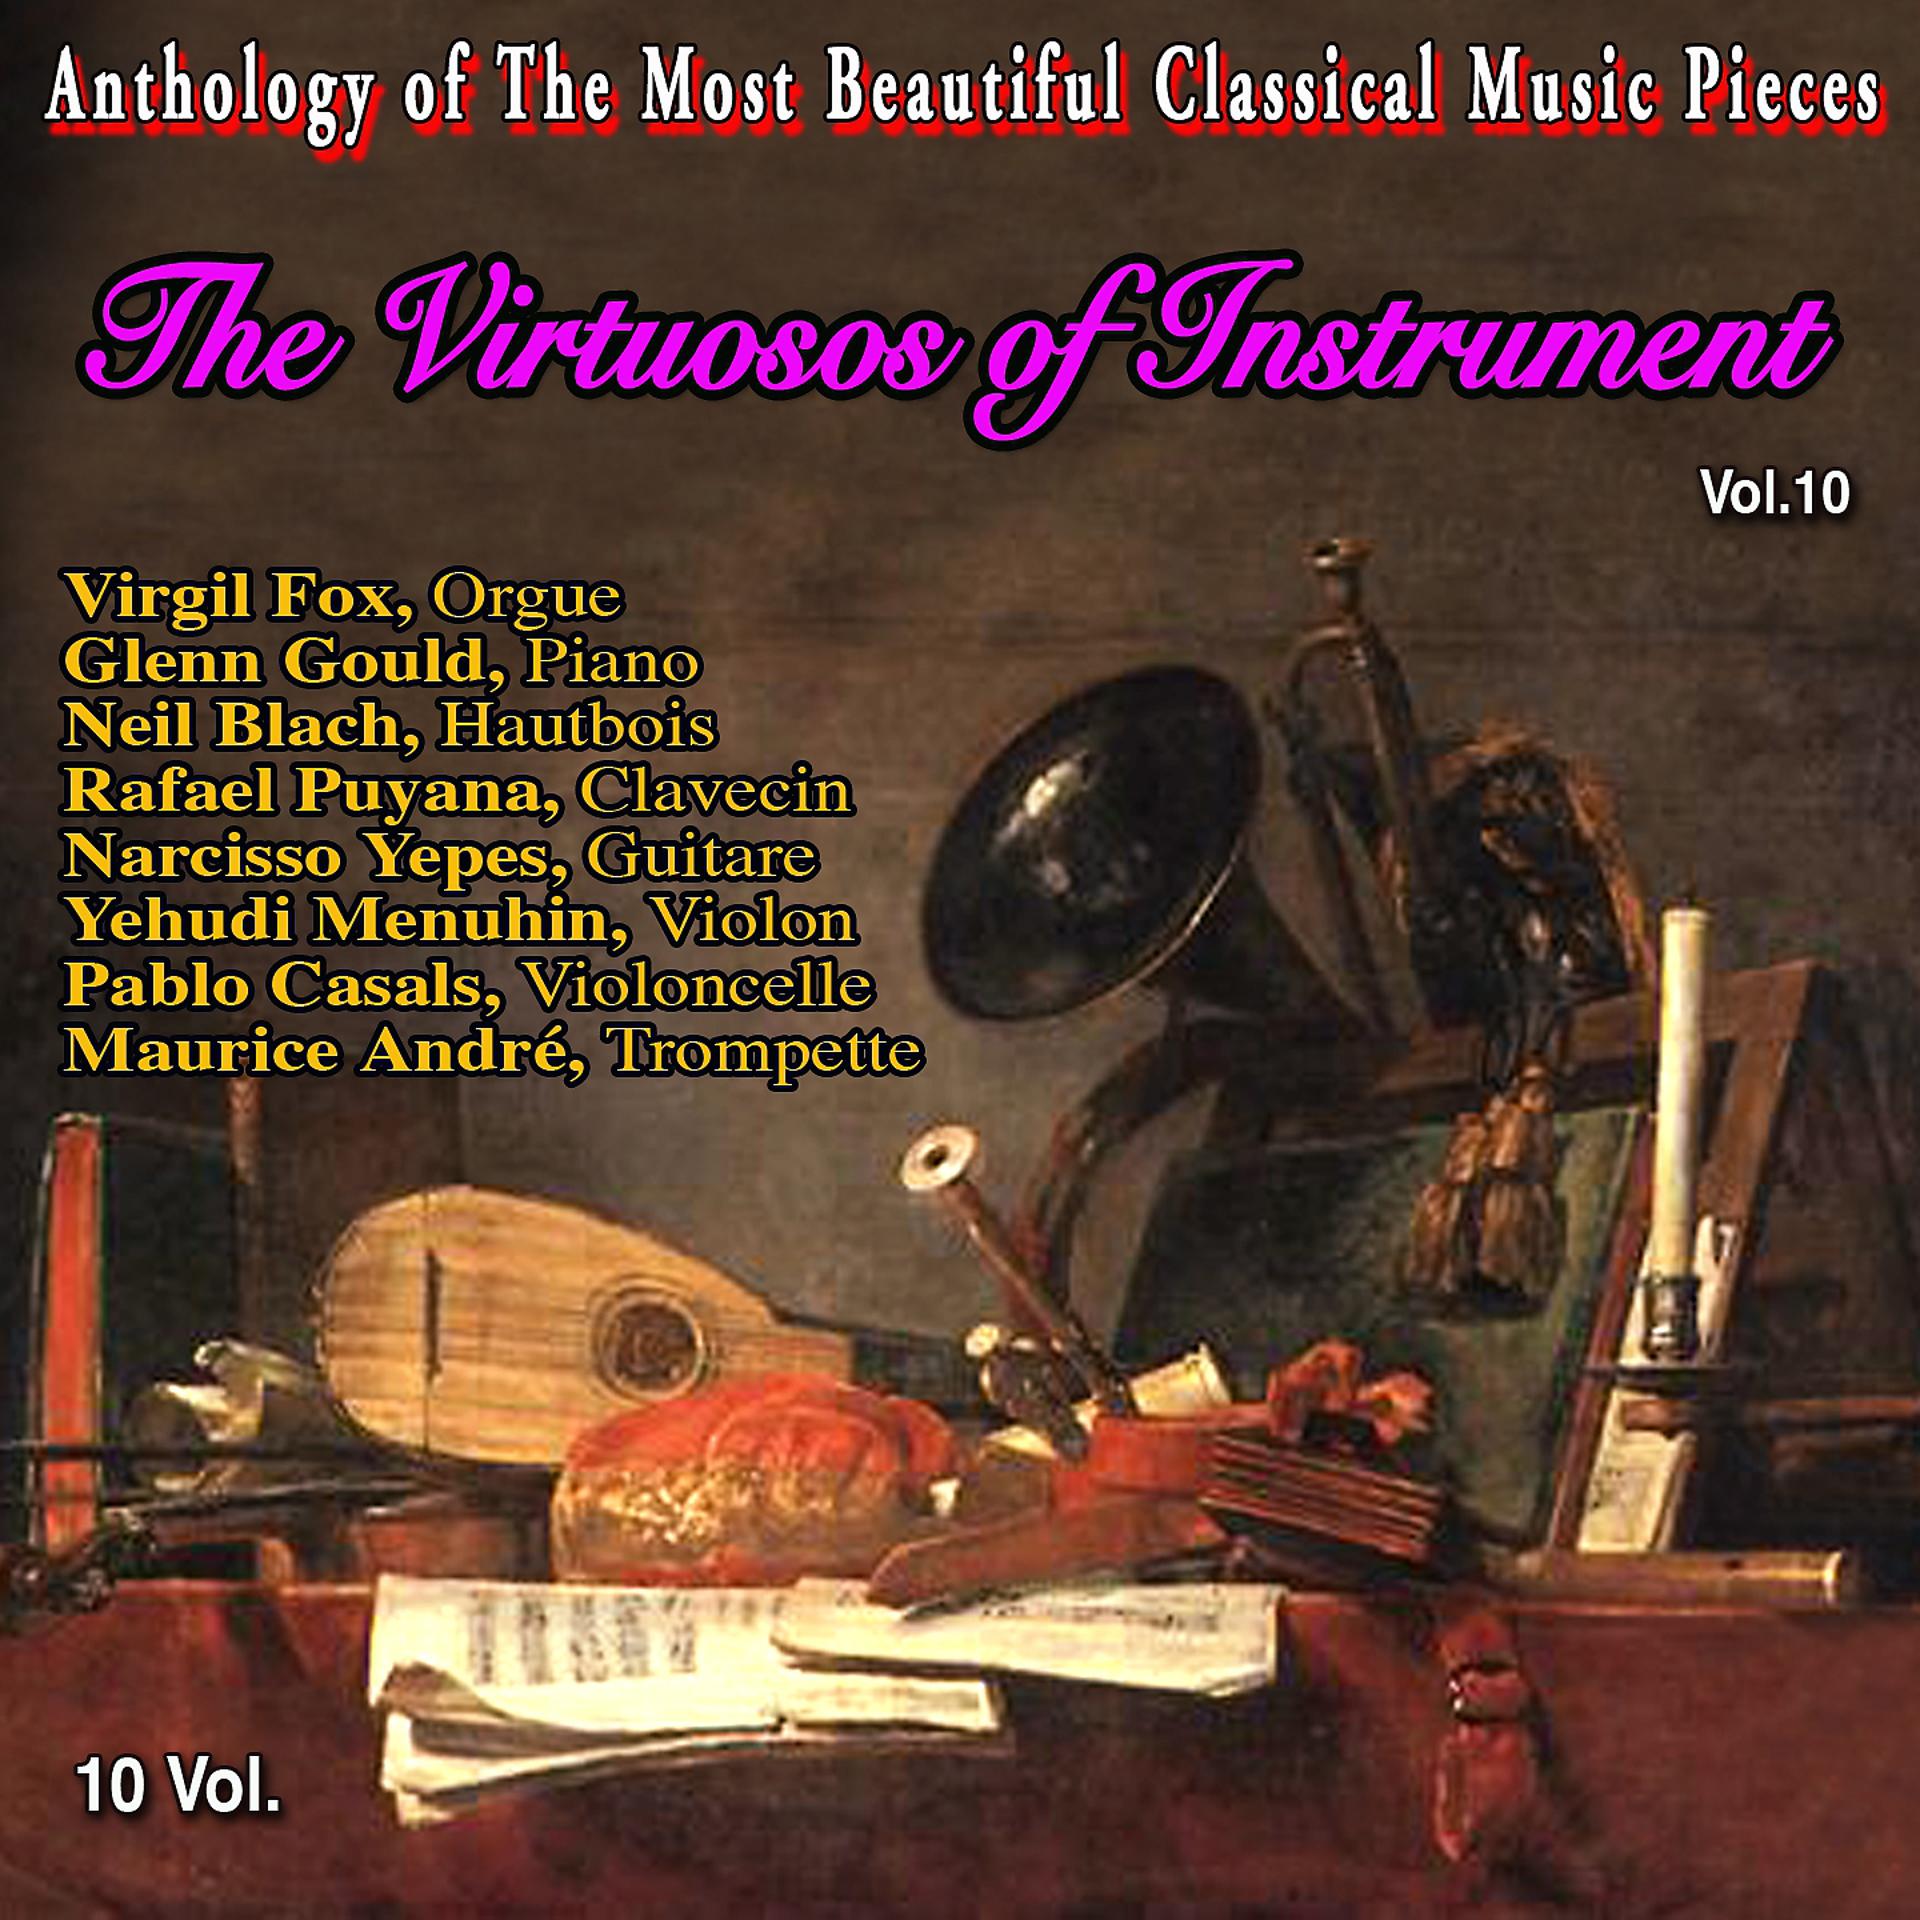 Постер альбома Anthology of The Most Beautiful Classical Music Pieces - 10 Vol